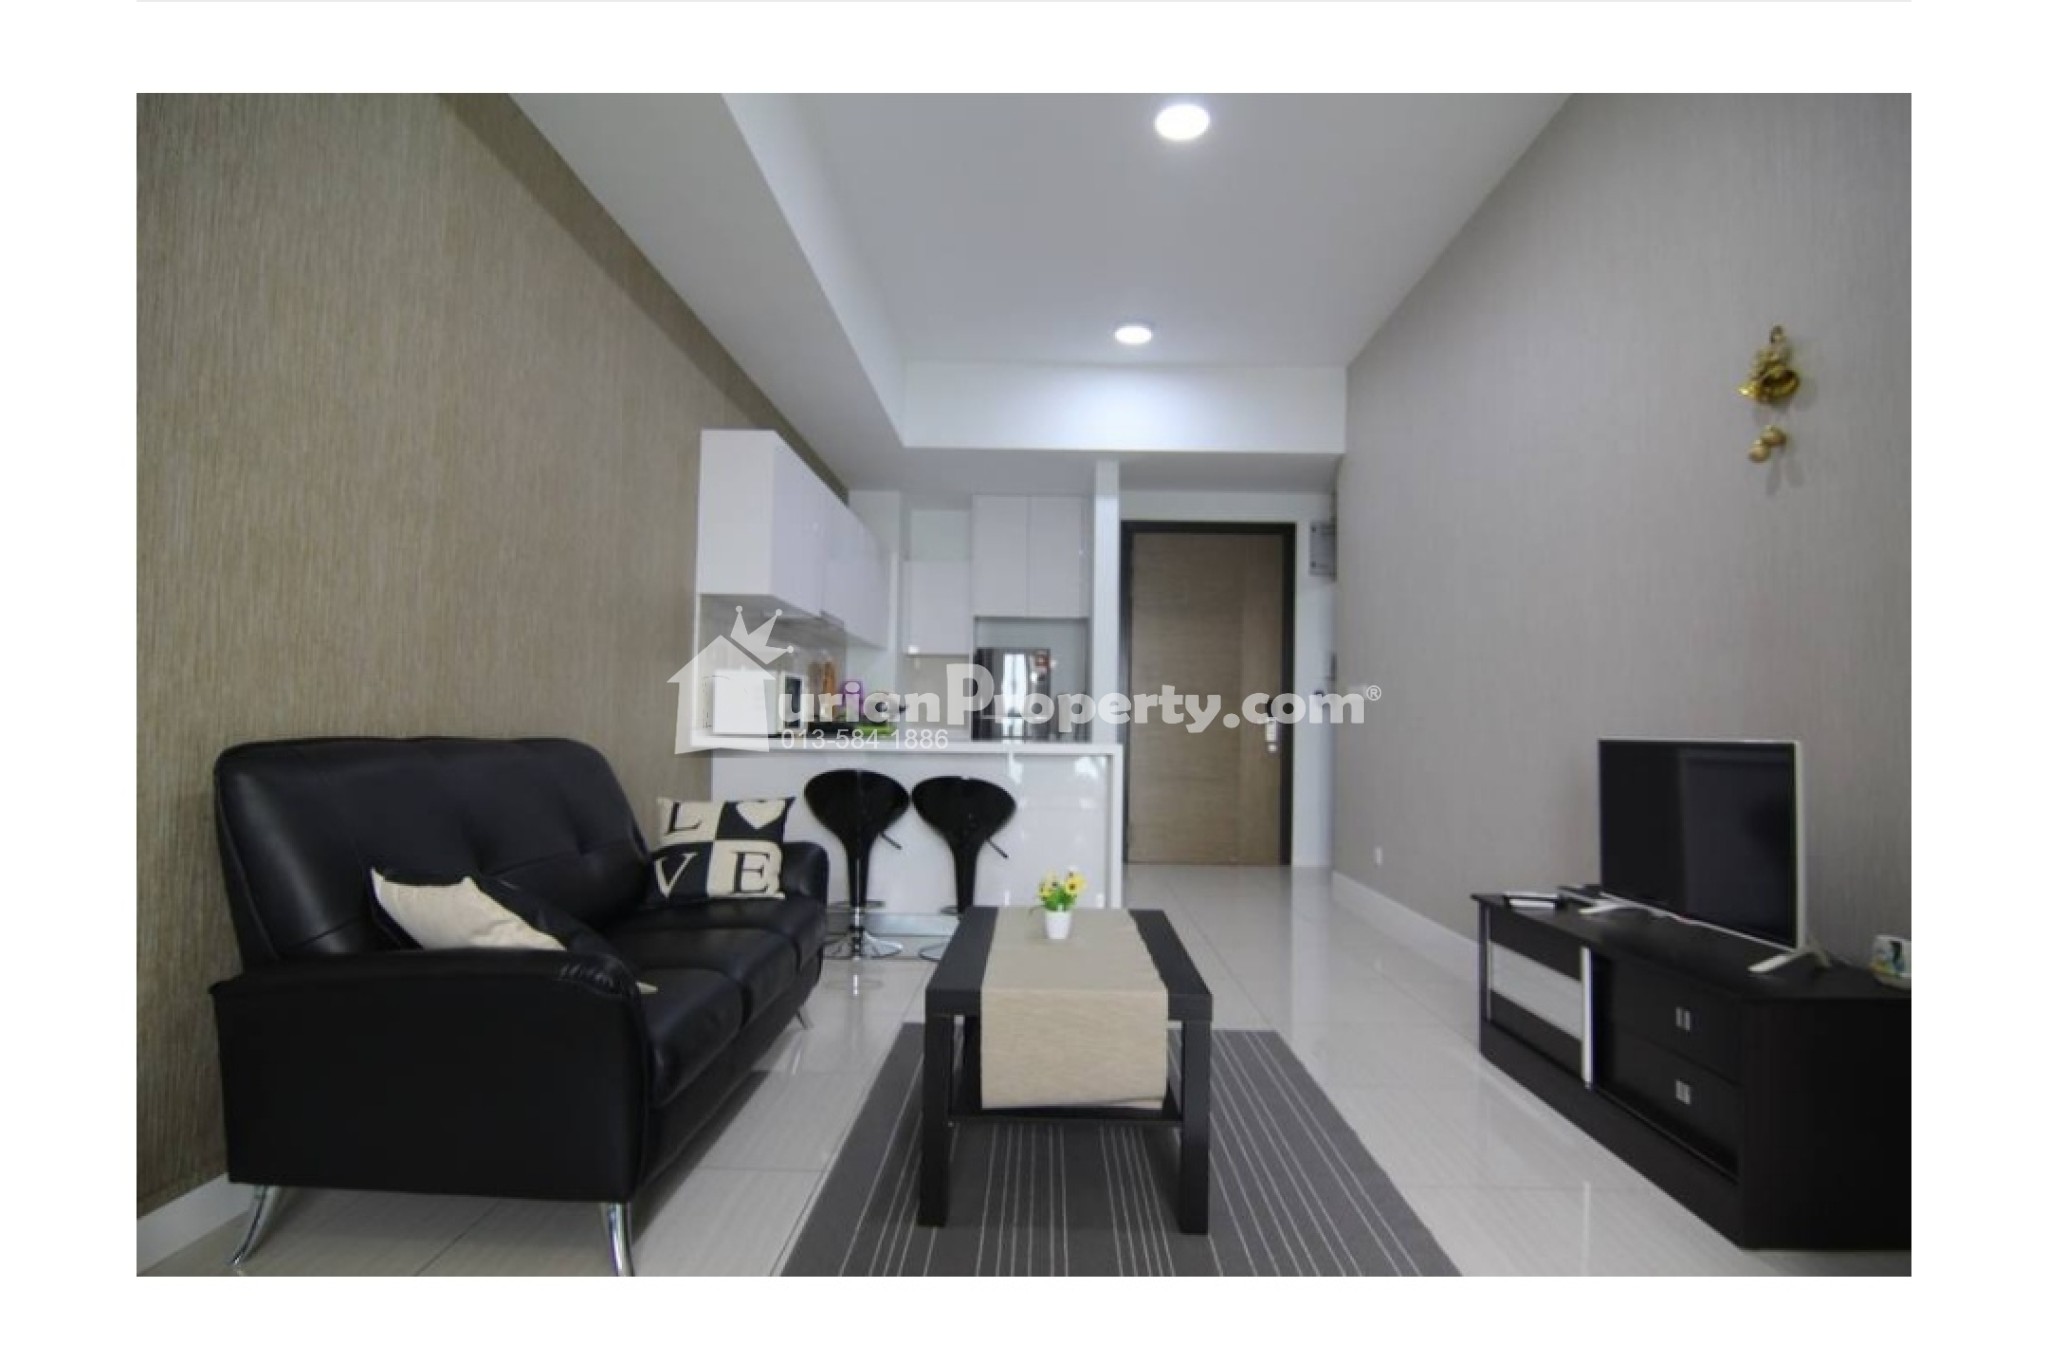 Condo For Sale at The Elements @ Ampang